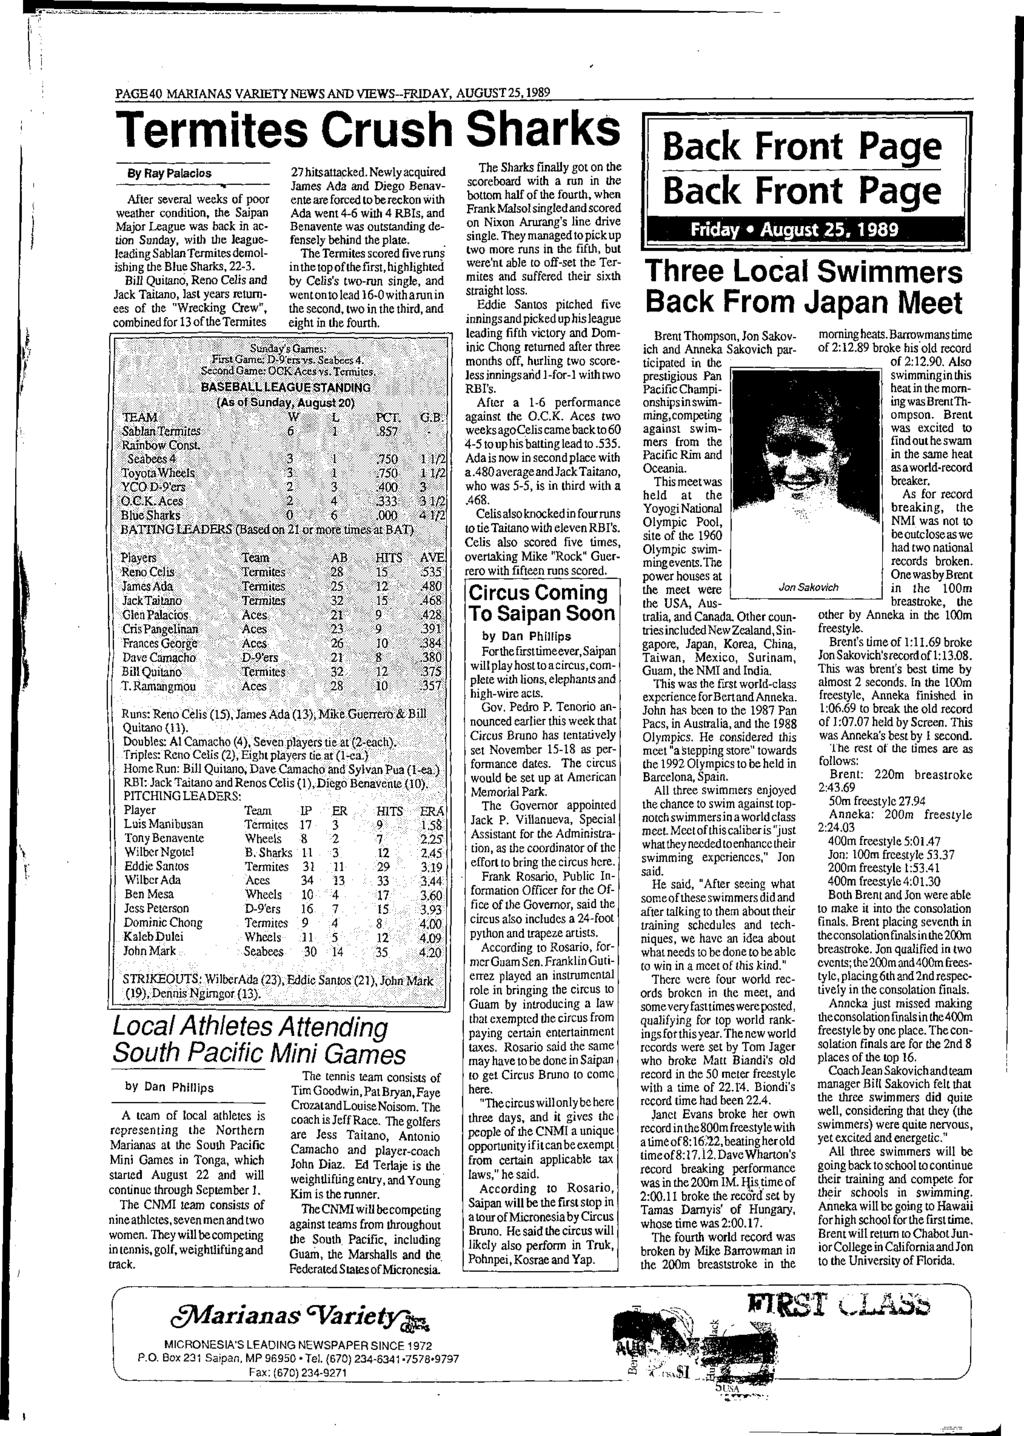 PAGE 40 MARIANAS VARIETY NEWS AND VIEW S-FRIDAY, AUGUST 25,1989 Termites Crush Sharks By R ay P a la c io s After several weeks o f poor weather condition, the Saipan Major League was back in action